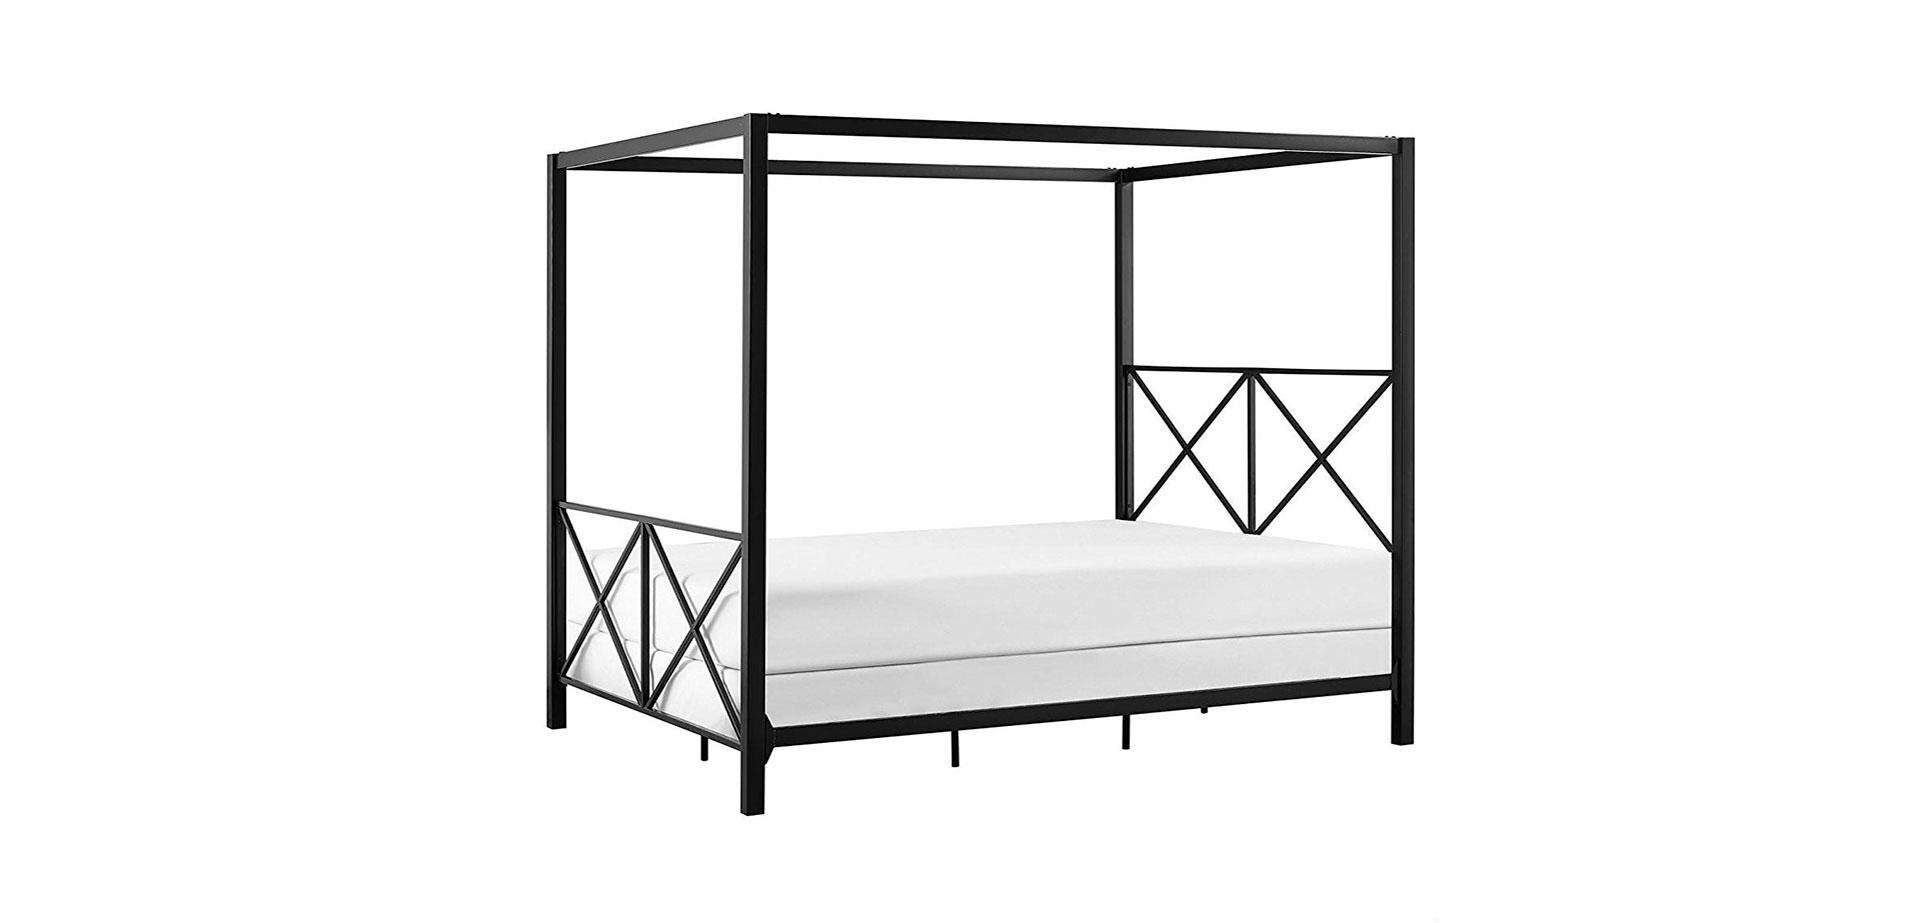 Four Post Canopy BDSM Bed Frame.